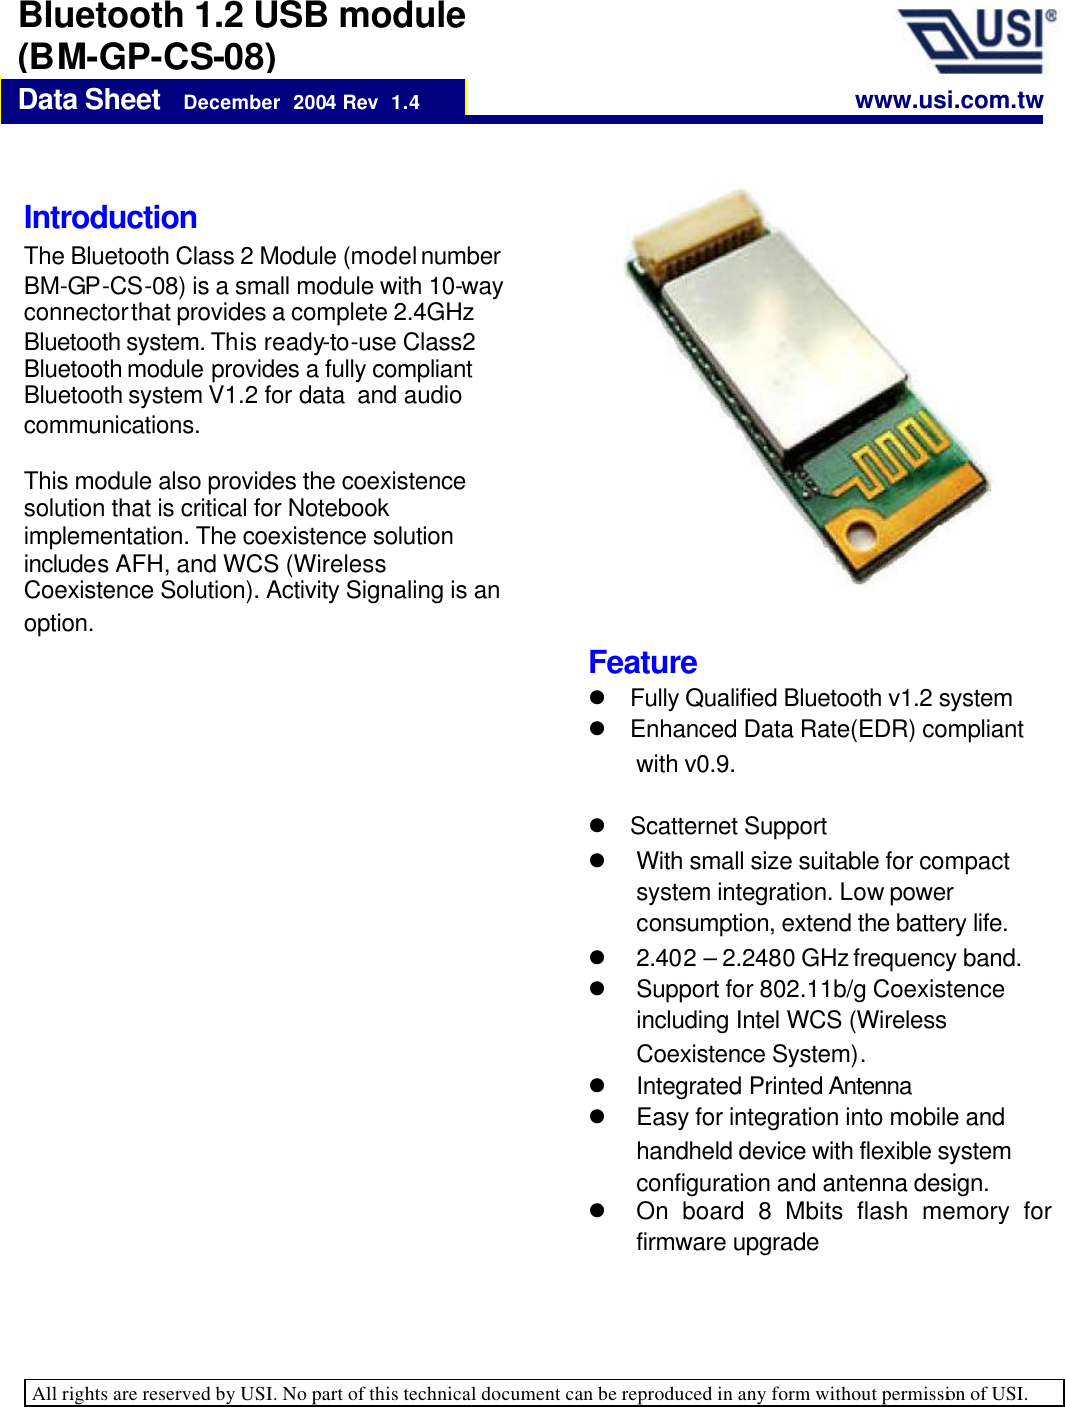   All rights are reserved by USI. No part of this technical document can be reproduced in any form without permission of USI.    Data Sheet   December  2004 Rev  1.4 Bluetooth 1.2 USB module (BM-GP-CS-08) Introduction  The Bluetooth Class 2 Module (model number BM-GP-CS-08) is a small module with 10-way connector that provides a complete 2.4GHz Bluetooth system. This ready-to-use Class2 Bluetooth module provides a fully compliant Bluetooth system V1.2 for data  and audio communications.   This module also provides the coexistence solution that is critical for Notebook implementation. The coexistence solution includes AFH, and WCS (Wireless Coexistence Solution). Activity Signaling is an option.   www.usi.com.tw Feature l Fully Qualified Bluetooth v1.2 system l Enhanced Data Rate(EDR) compliant with v0.9. l Scatternet Support l  With small size suitable for compact system integration. Low power consumption, extend the battery life. l  2.40 2 – 2.2480 GHz frequency band. l Support for 802.11b/g Coexistence including Intel WCS (Wireless Coexistence System). l Integrated Printed Antenna l Easy for integration into mobile and handheld device with flexible system configuration and antenna design. l On board 8 Mbits flash memory for firmware upgrade 